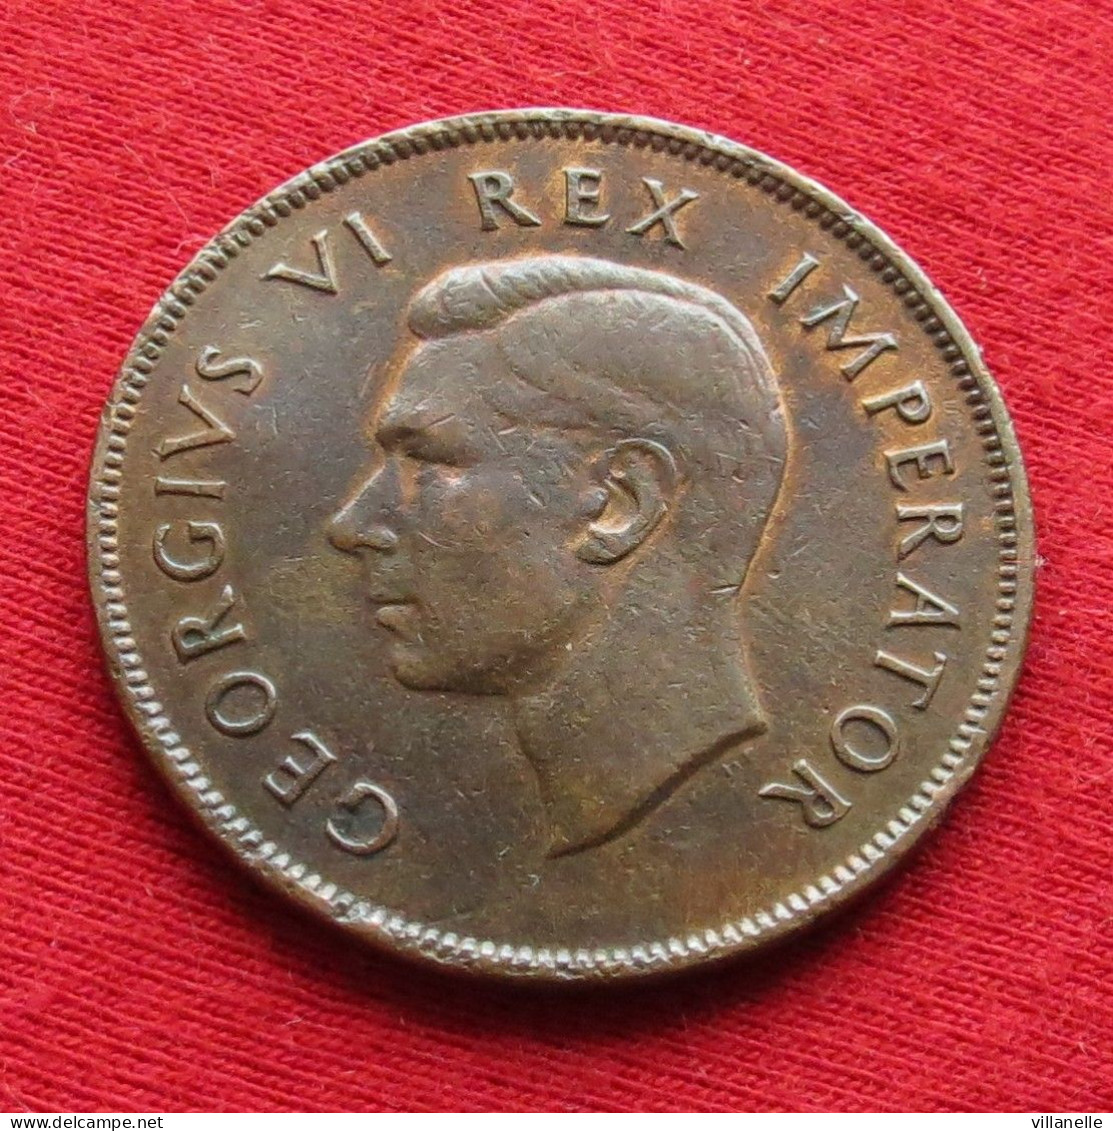 South Africa 1 Penny 1942 Without Star After Date   Africa Do Sul RSA Afrique Do Sud Afrika   W ºº - Südafrika